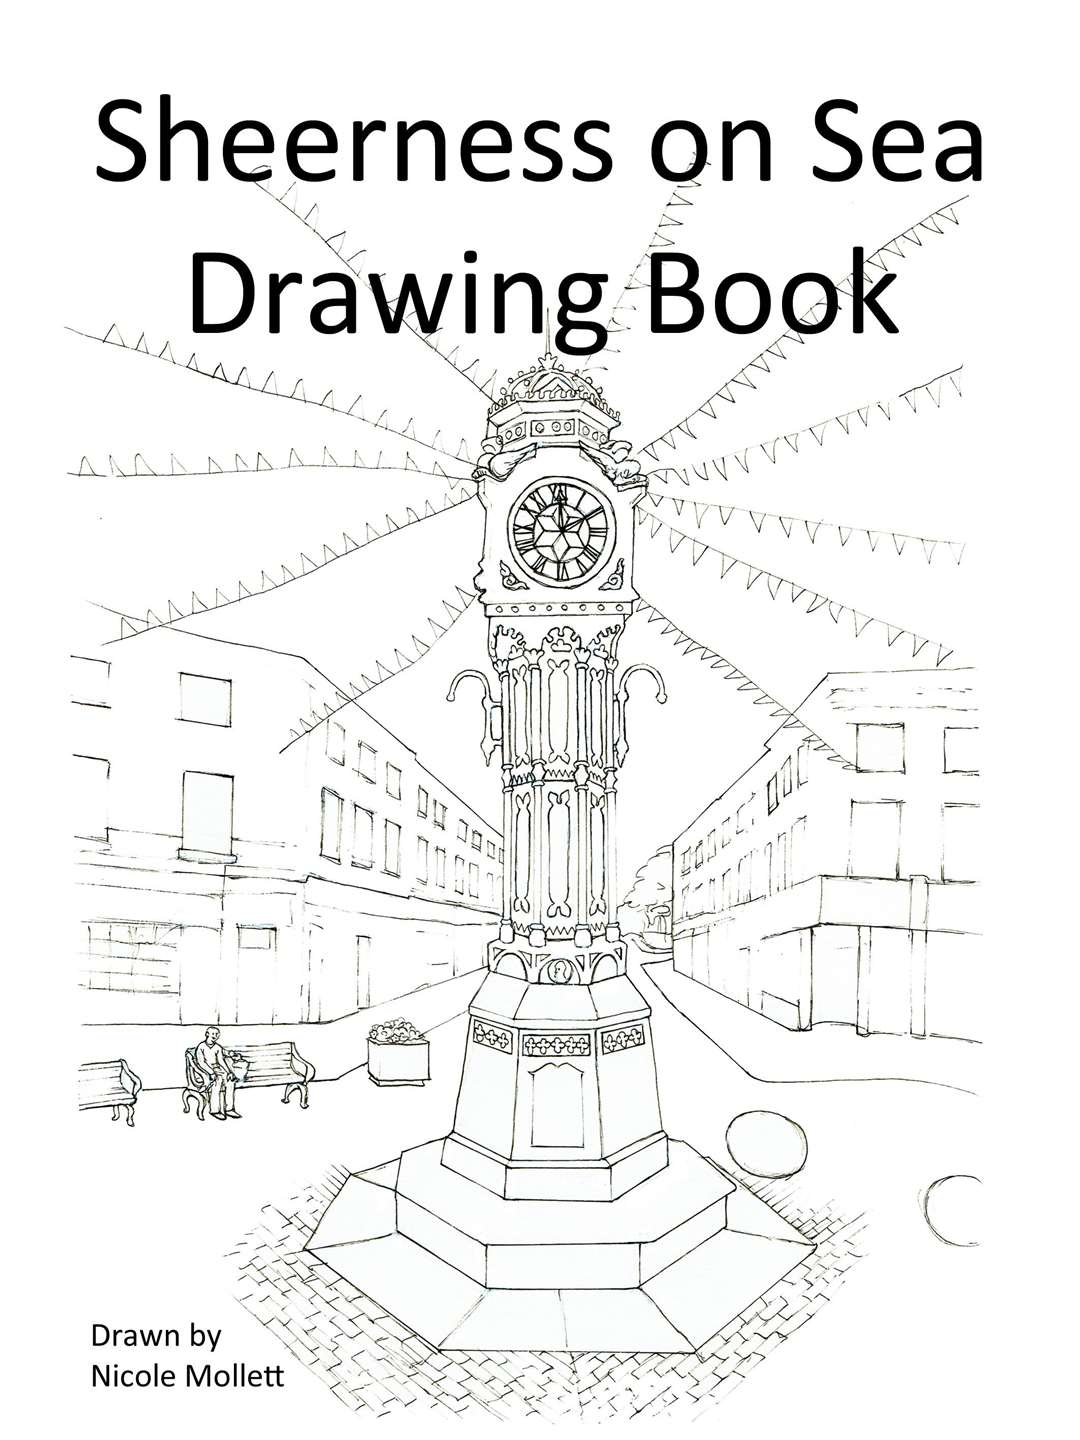 Front cover of artist Nicole Mollett's Sheerness-on-Sea Drawing Book